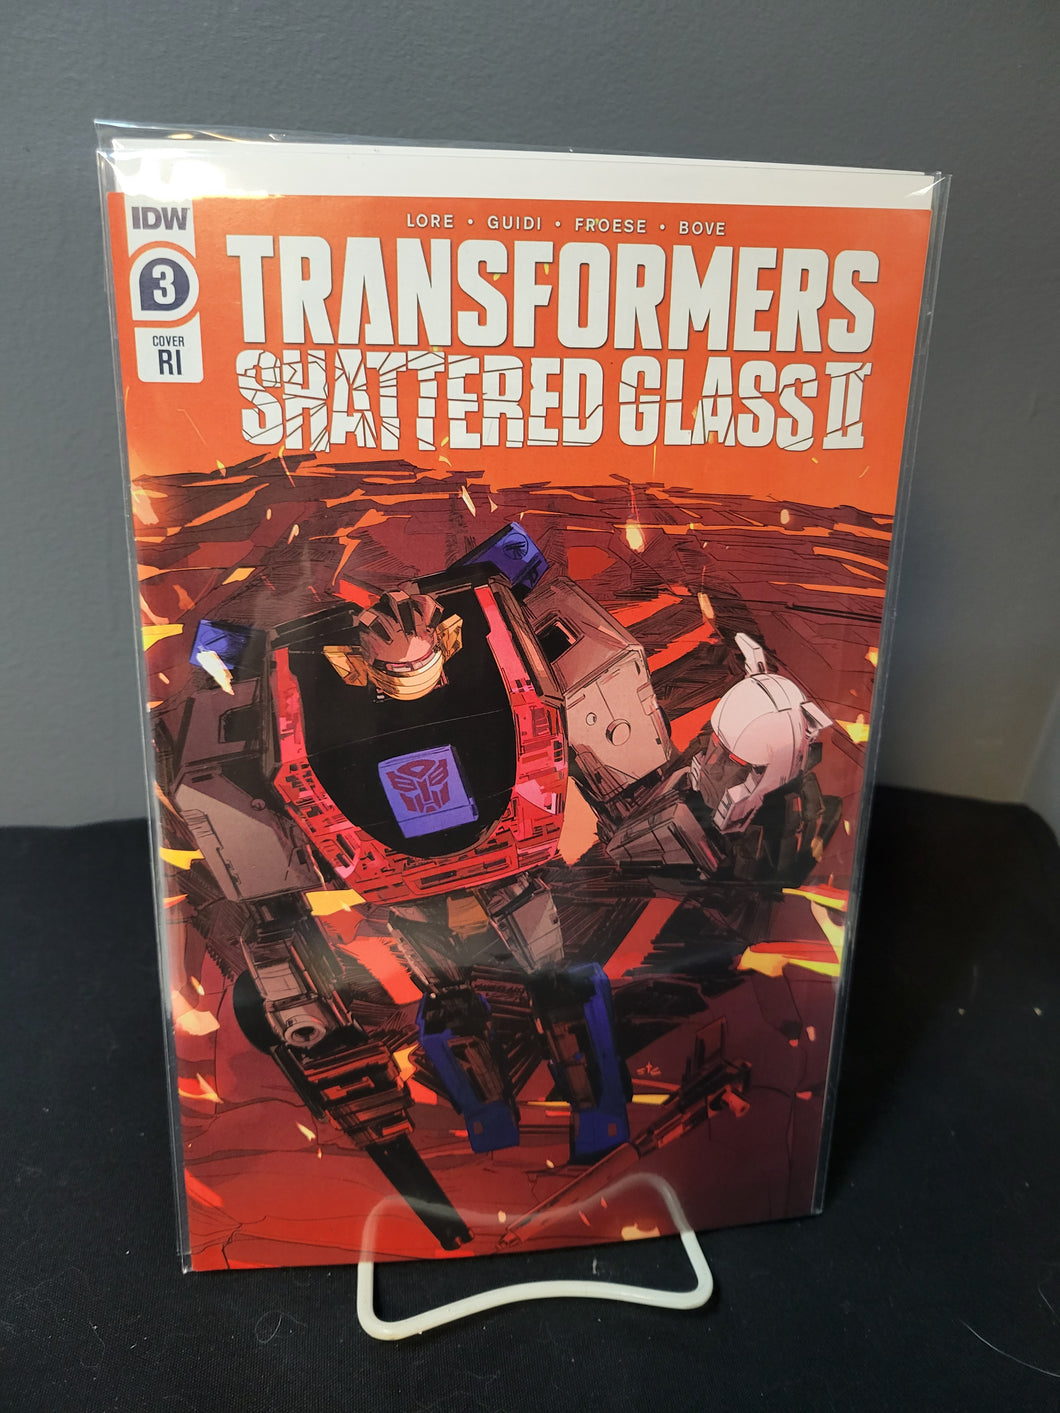 Transformers Shattered Glass II 3 1:10 Ratio Variant